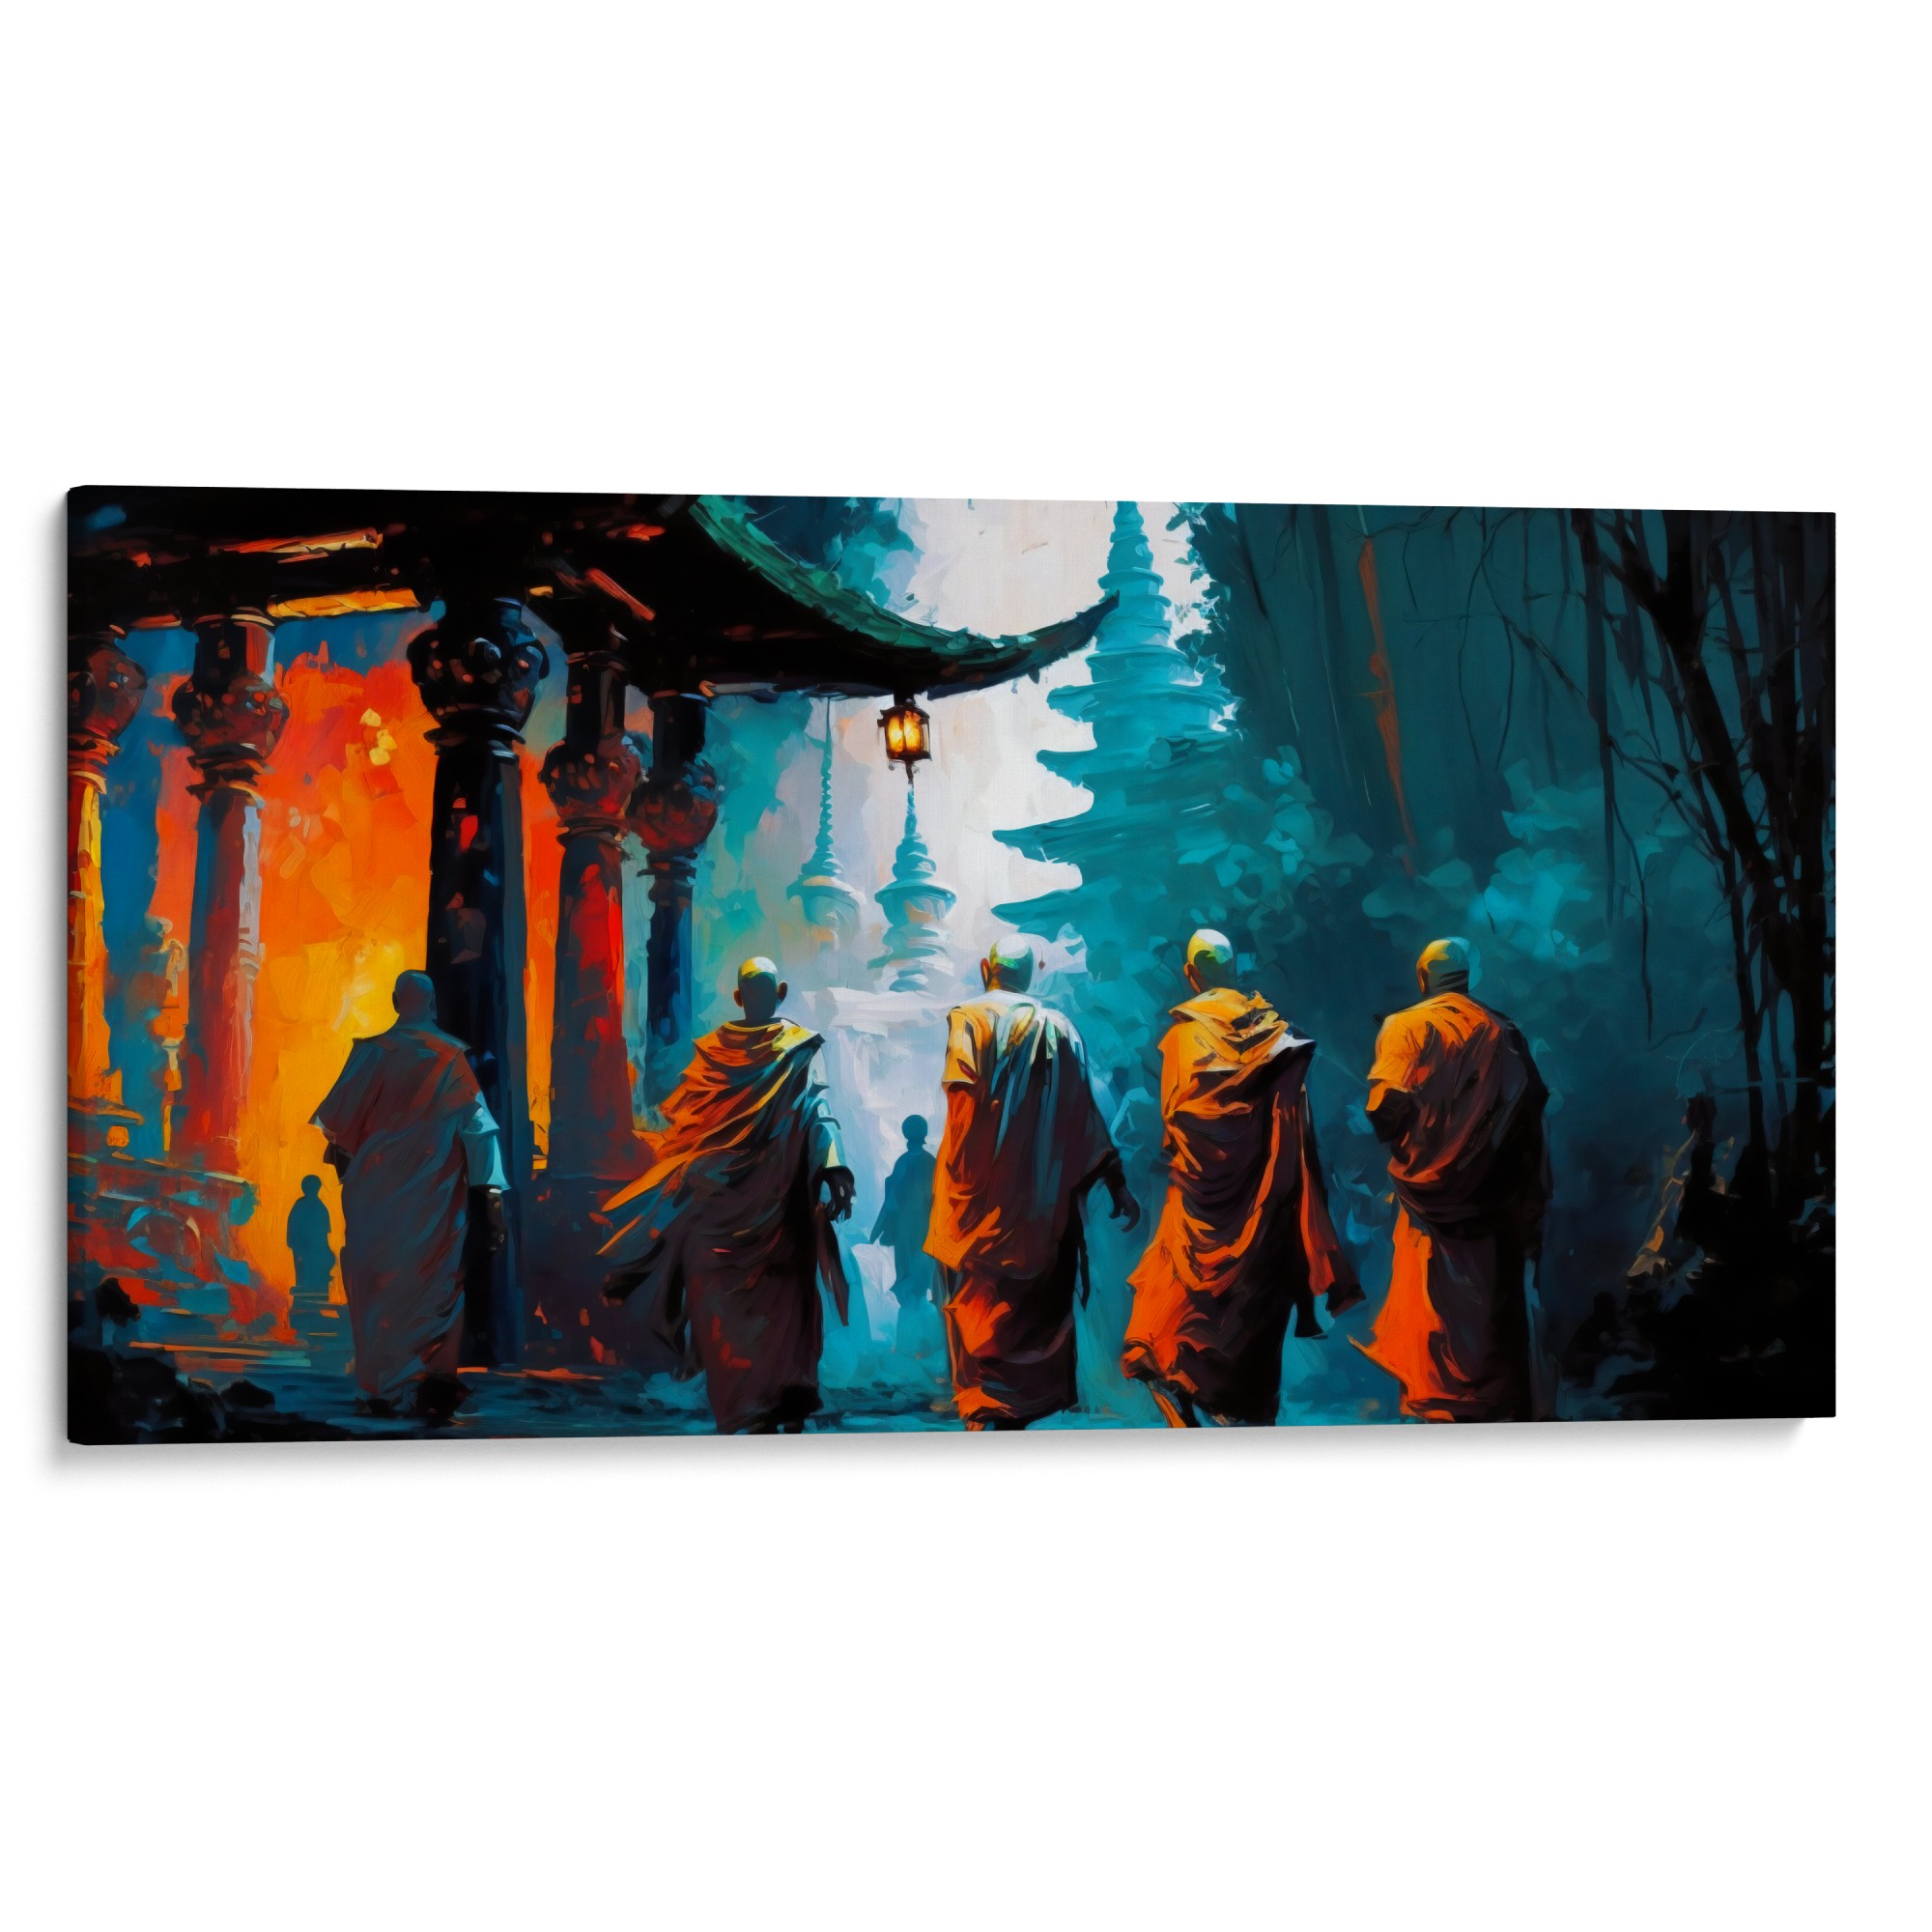 FOOTFALLS OF FAITH Artwork - Monks amidst silent forests, a symbol of peace and enlightenment.